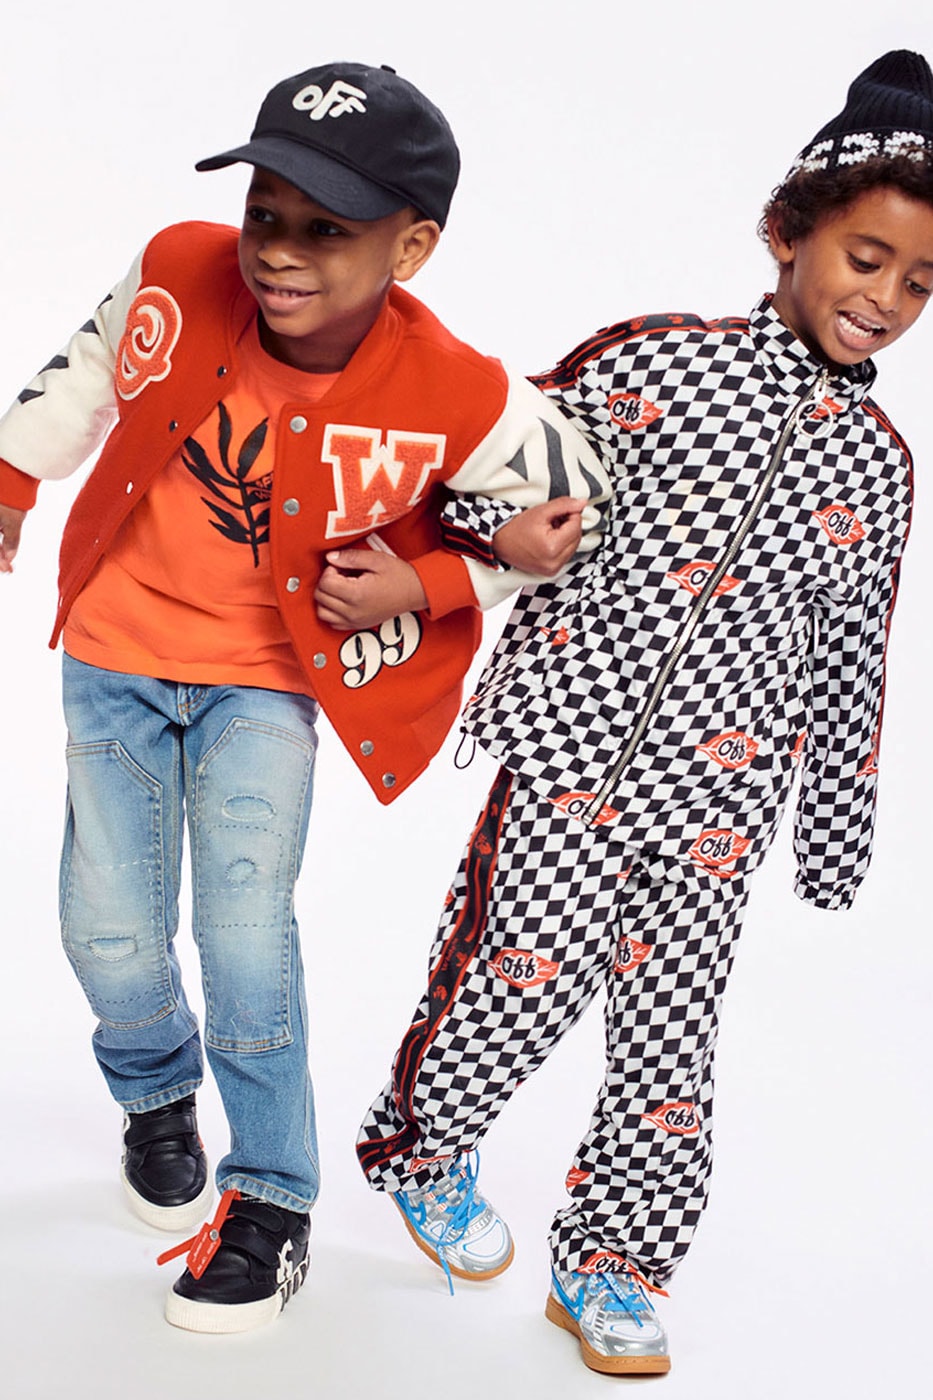 Off-White™ Kids Releases its FW21 Collection hippie culture bright colors camo checkered flannel letterman jackets low vulcanized sneakers virgil abloh fall winter 2021 release info